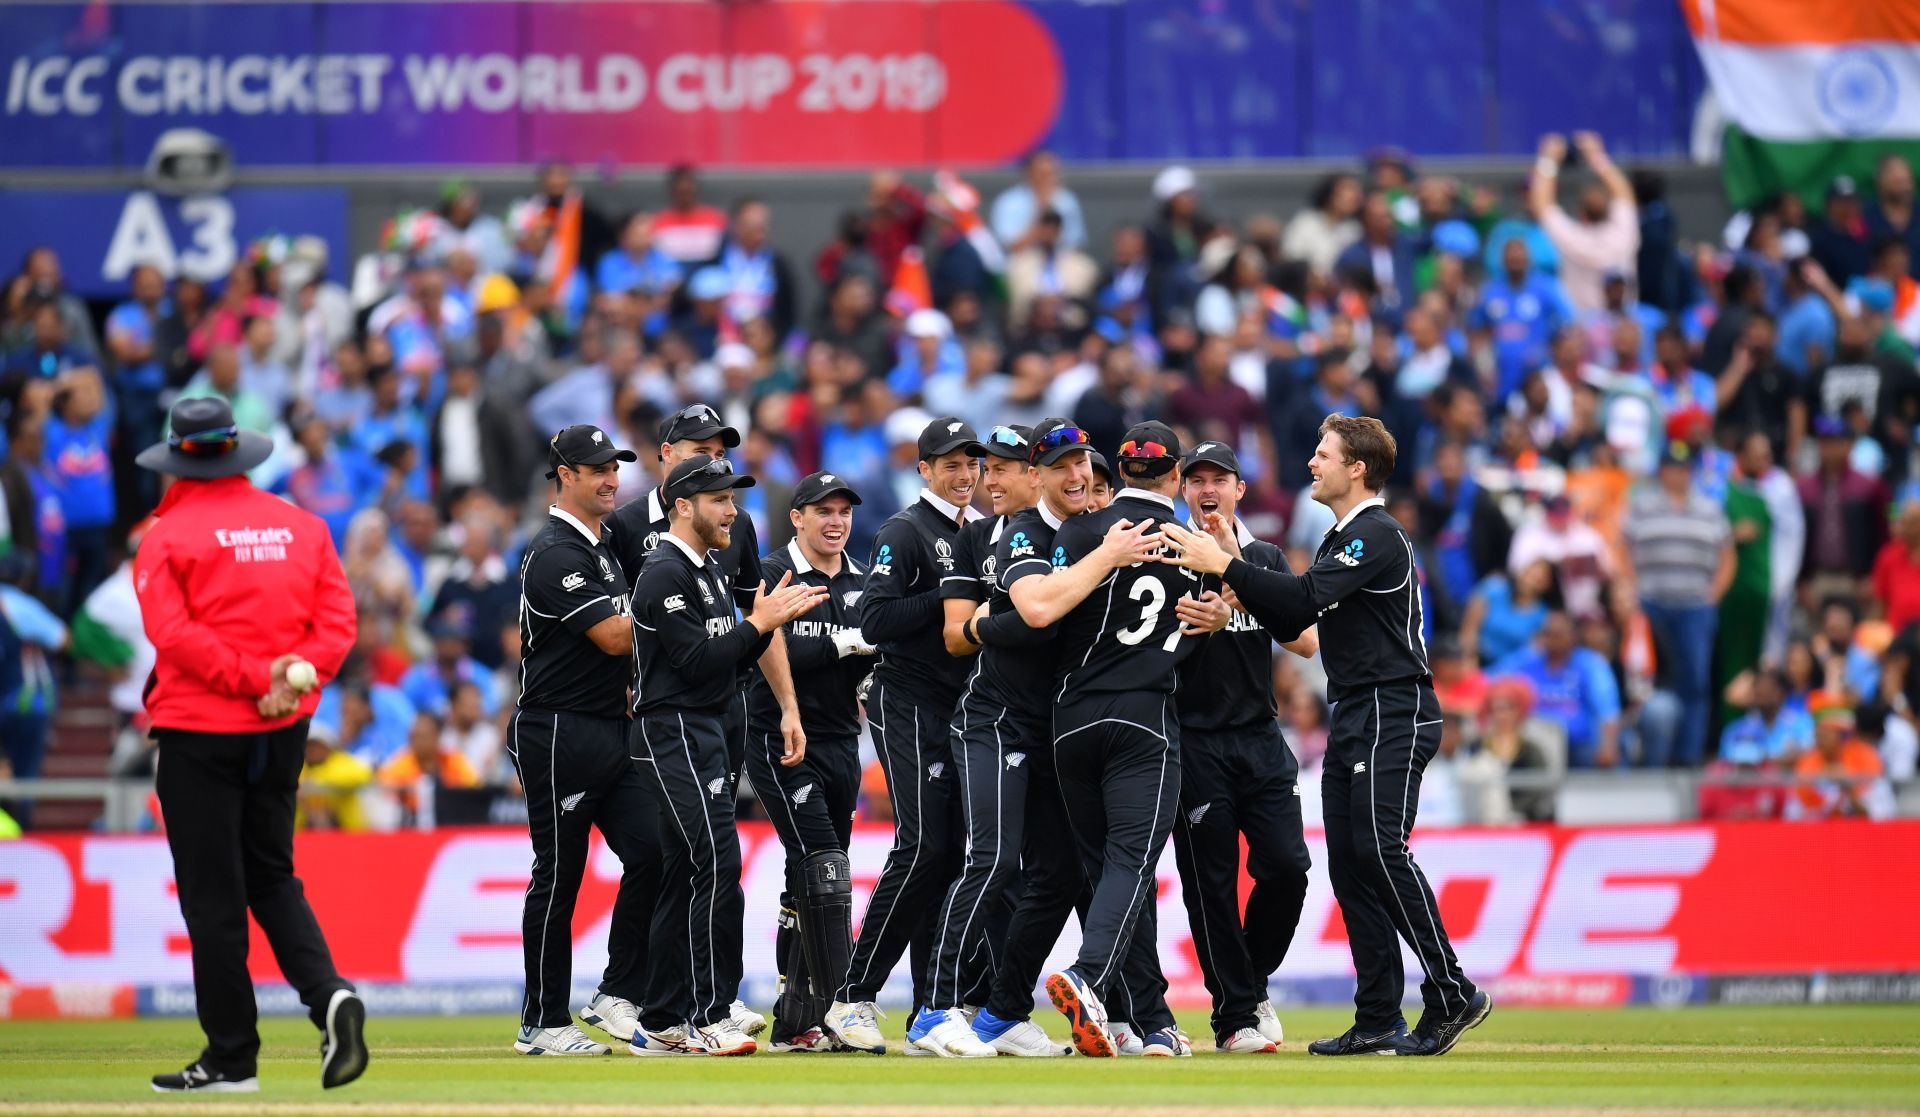 New Zealand players celebrate the run out of MS Dhoni in the 2019 World Cup semi-final. (Pic: Getty Images)